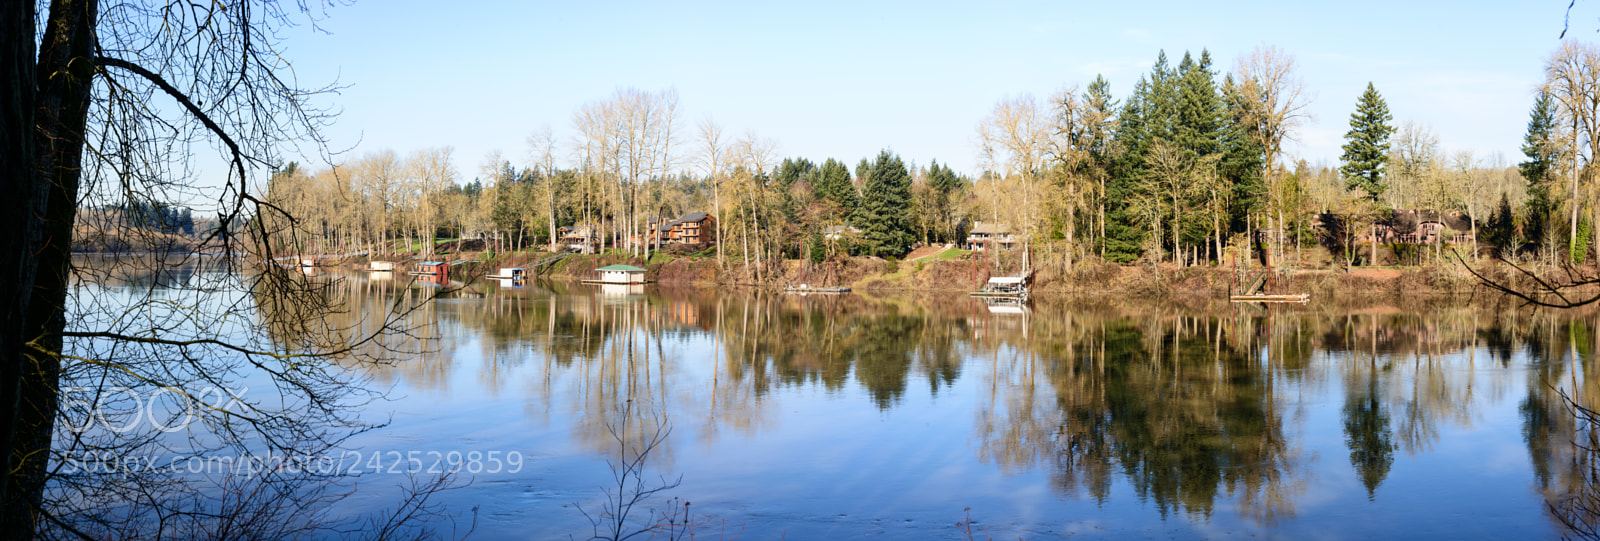 Nikon D800 sample photo. Reflections of the willamette photography